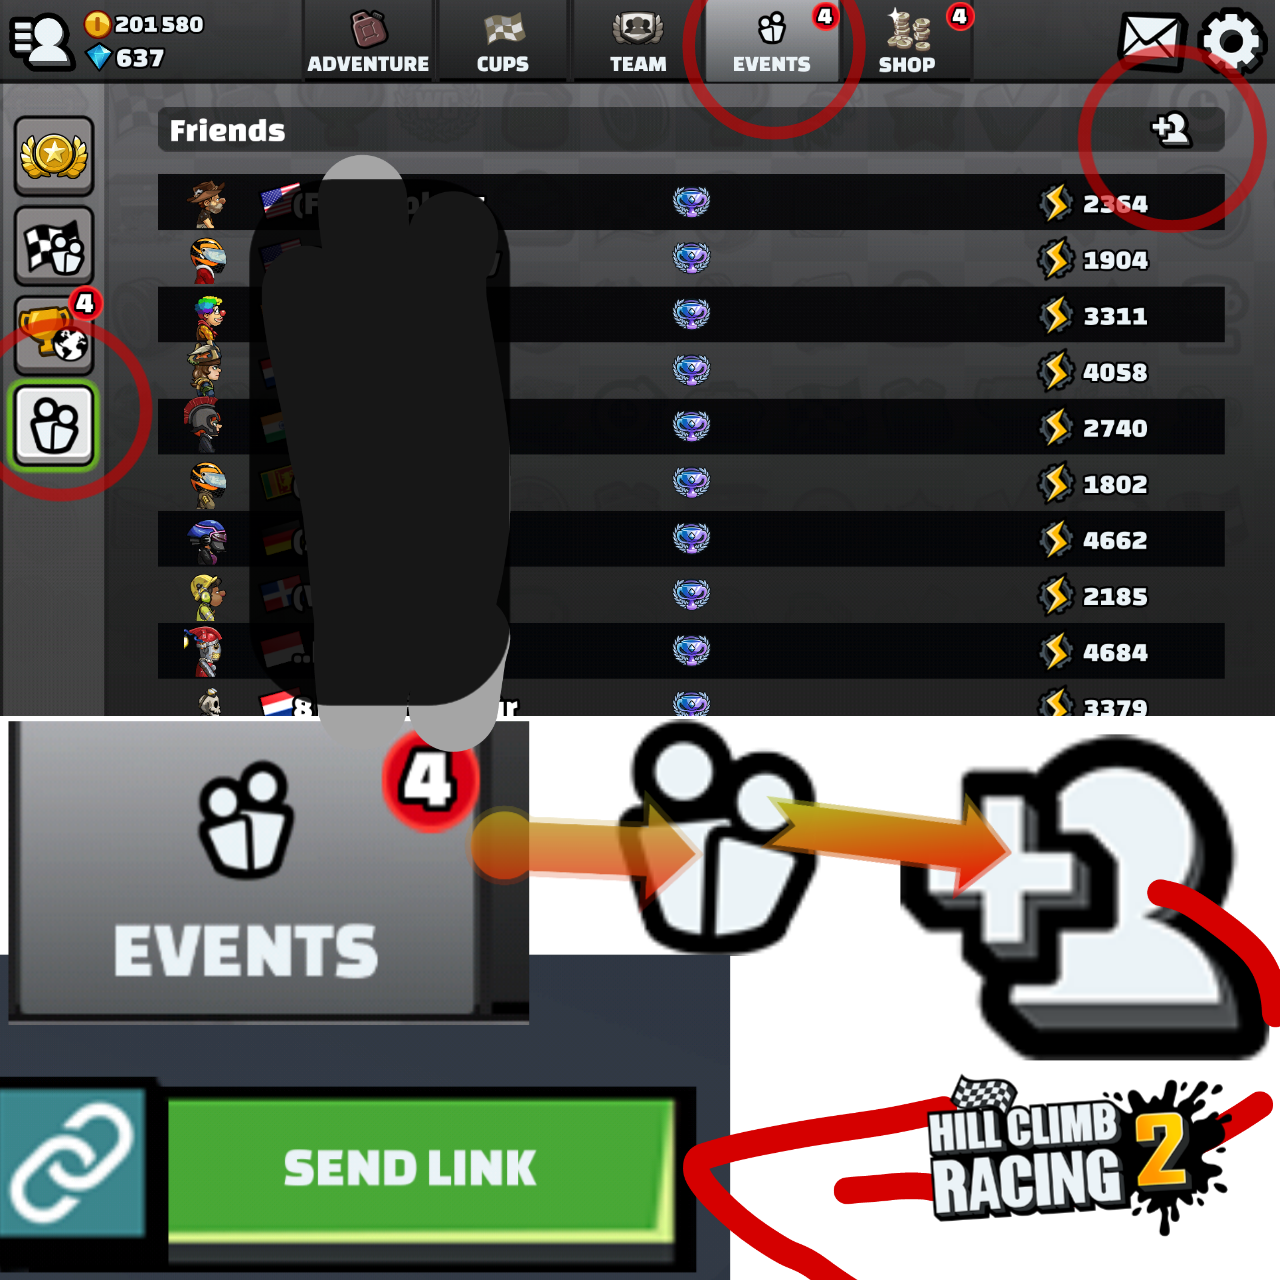 Hill Climb Racing - Have you already tried tuning parts? Which one